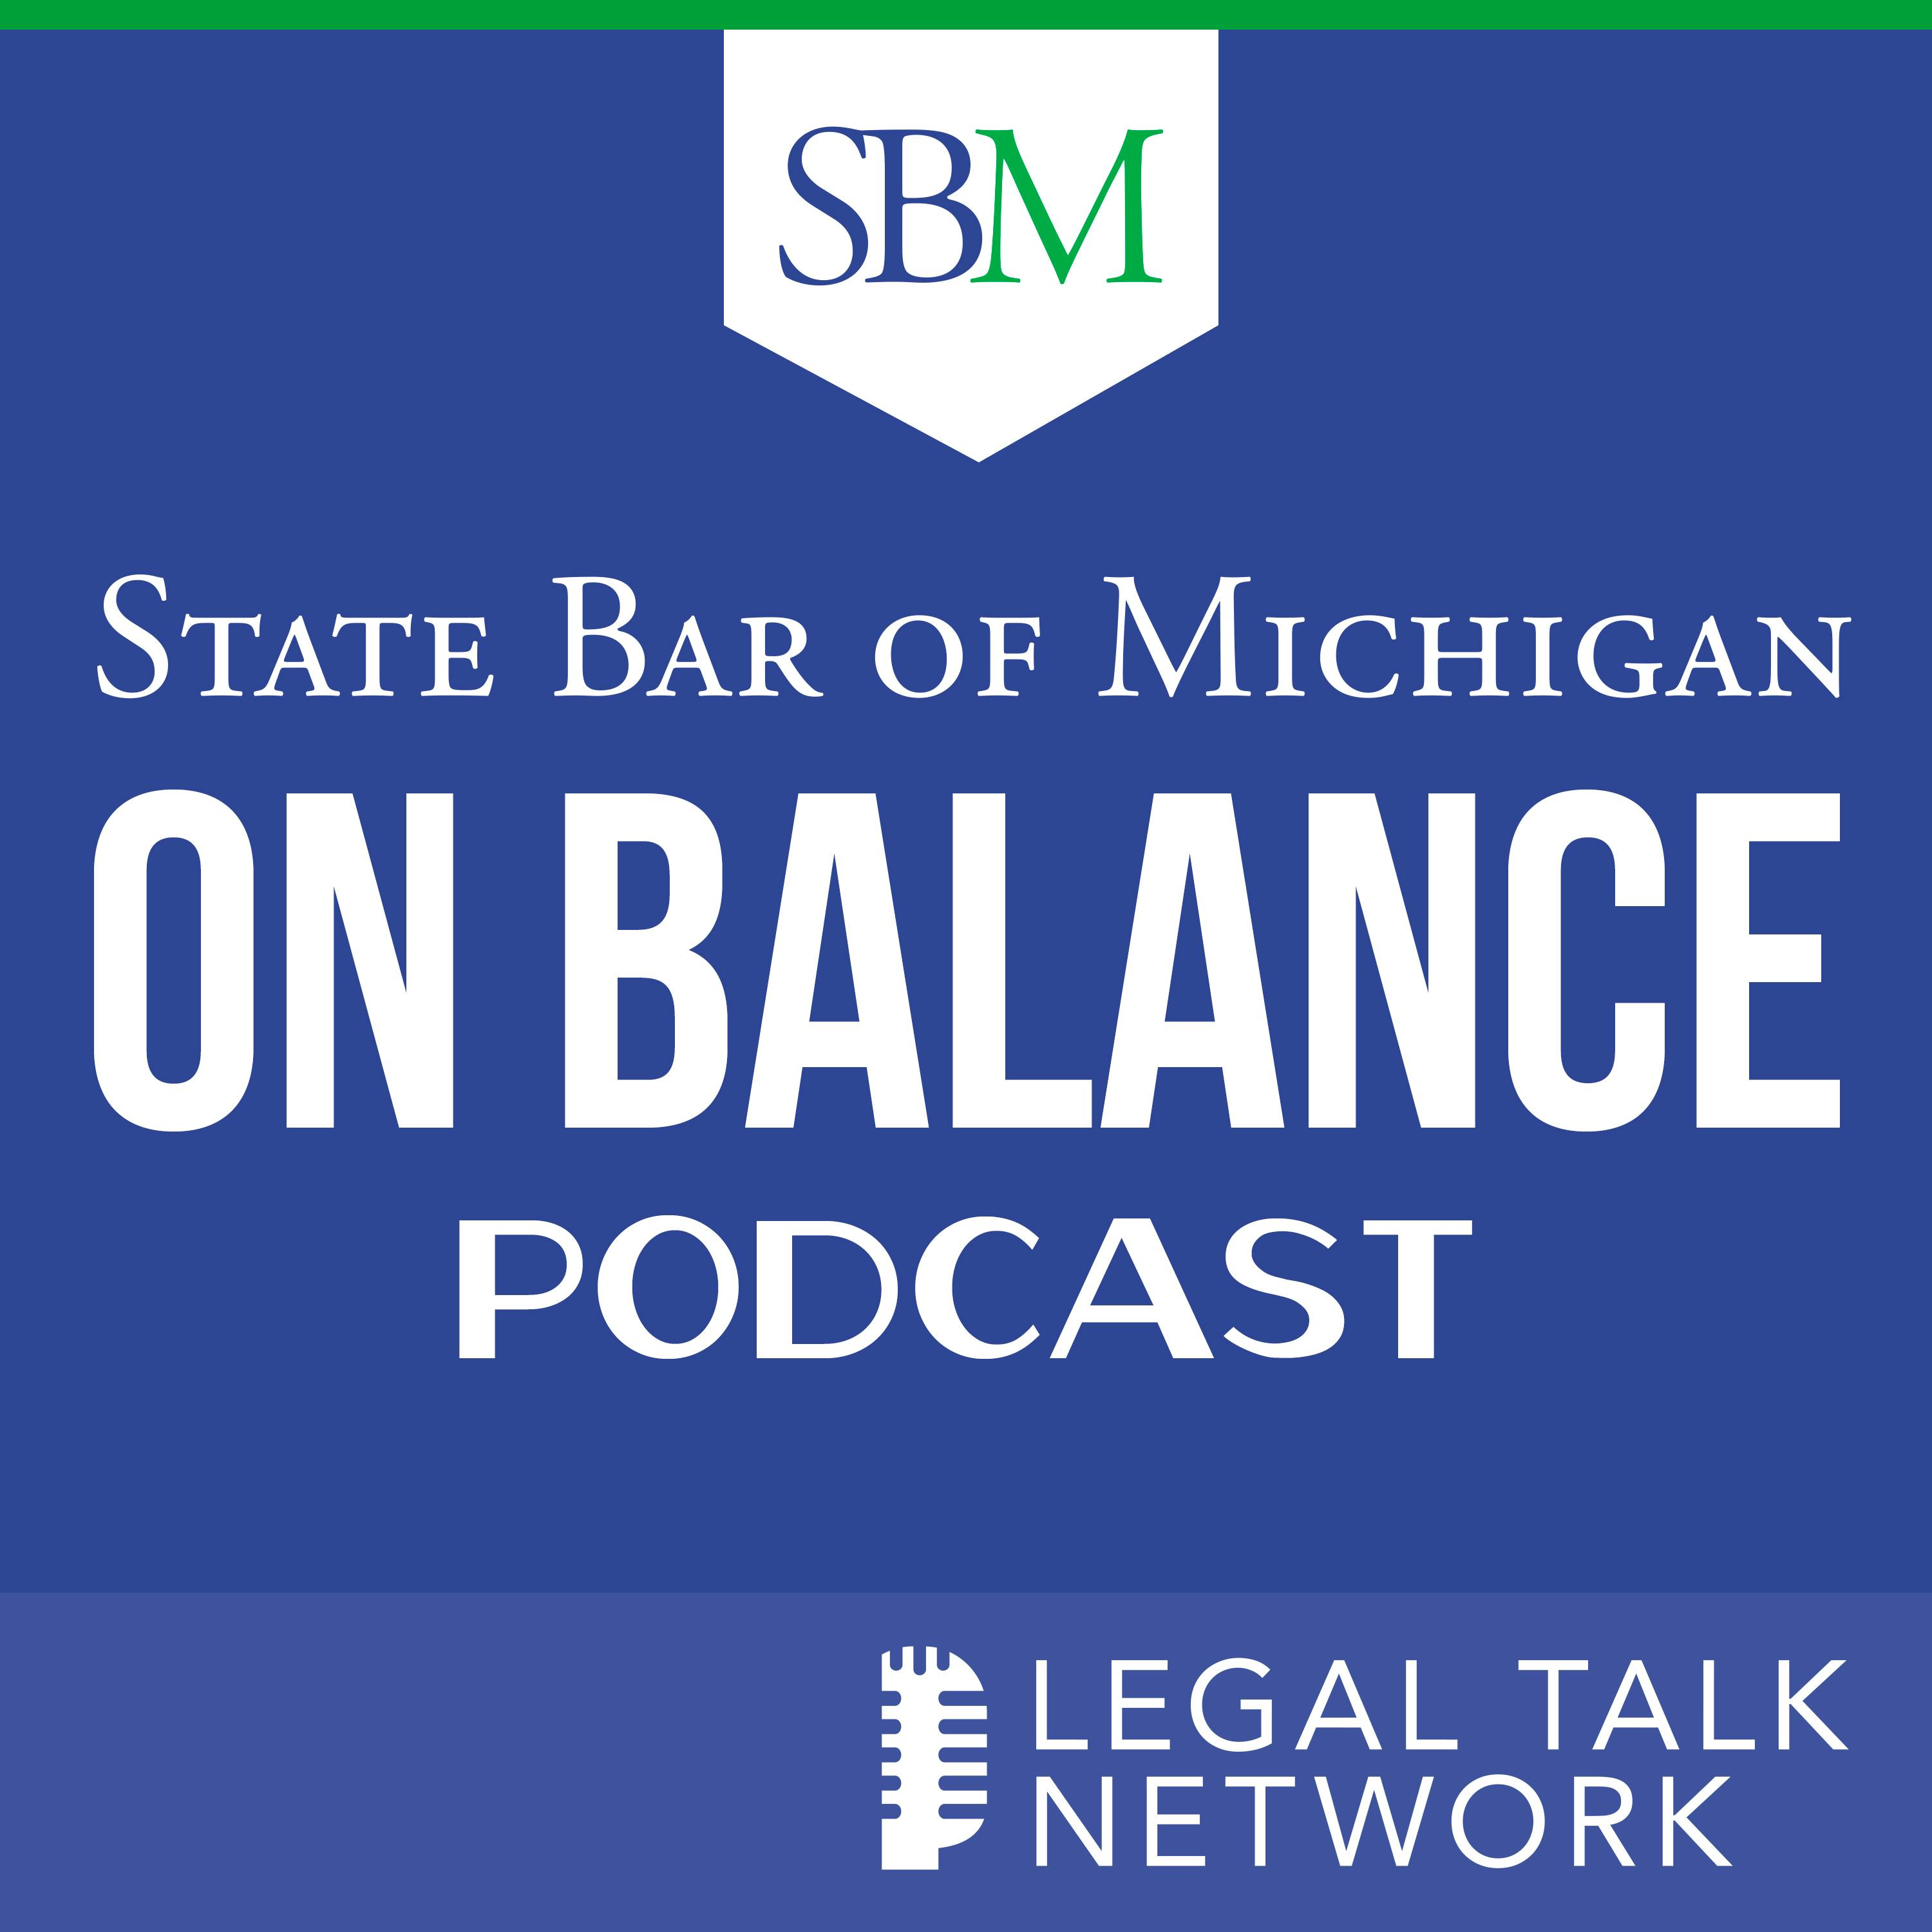 State Bar of Michigan NEXT Conference 2018: What Initiatives Matter Most to Bar Leaders?